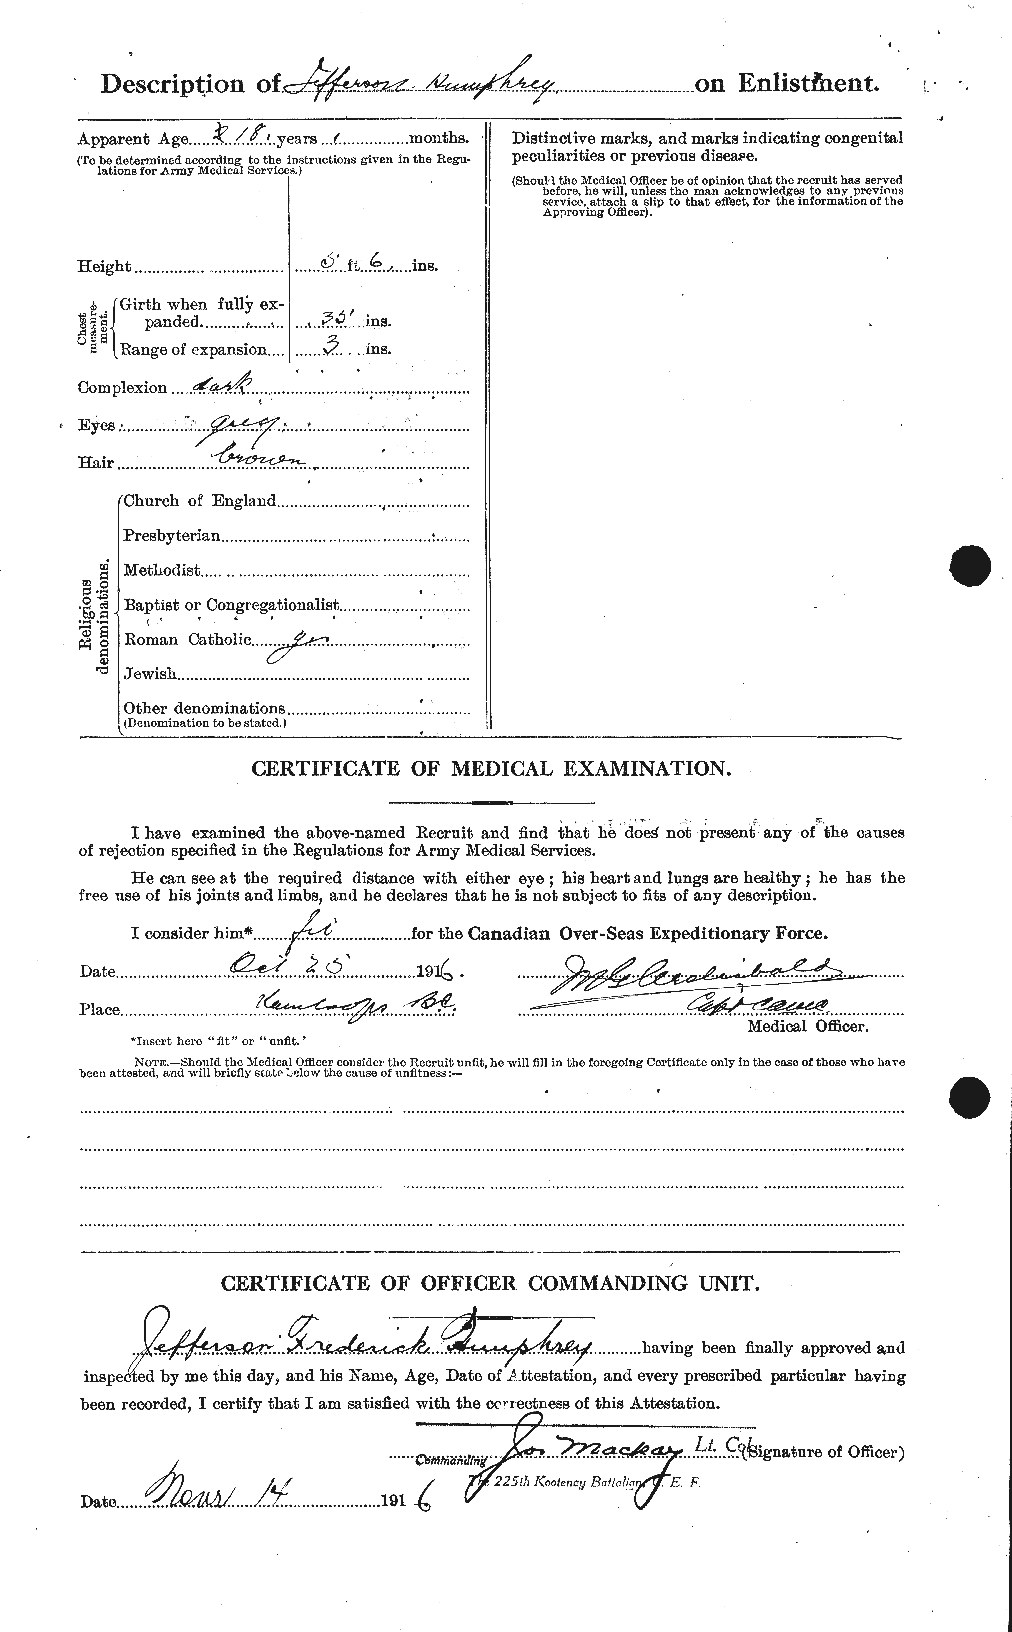 Personnel Records of the First World War - CEF 407413b